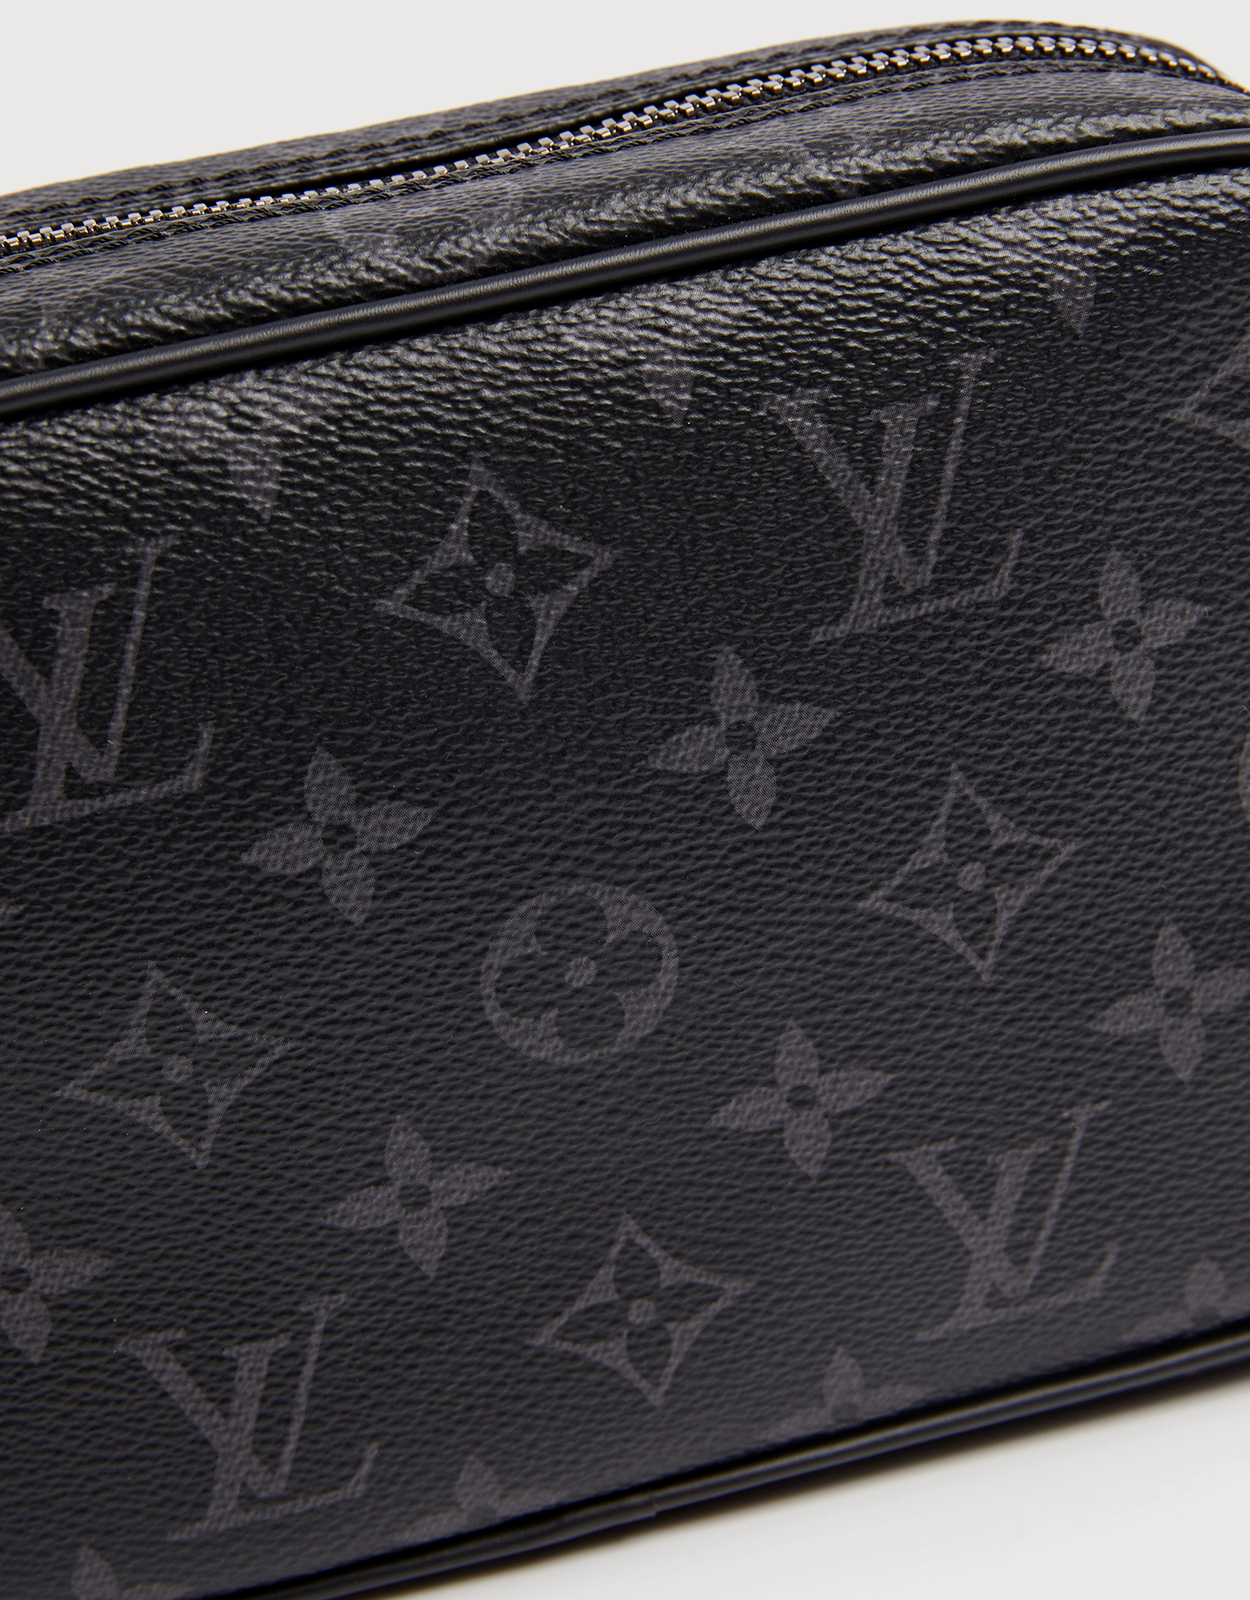 Louis Vuitton Is Launching a Monogram Lipstick Case - Where to Buy